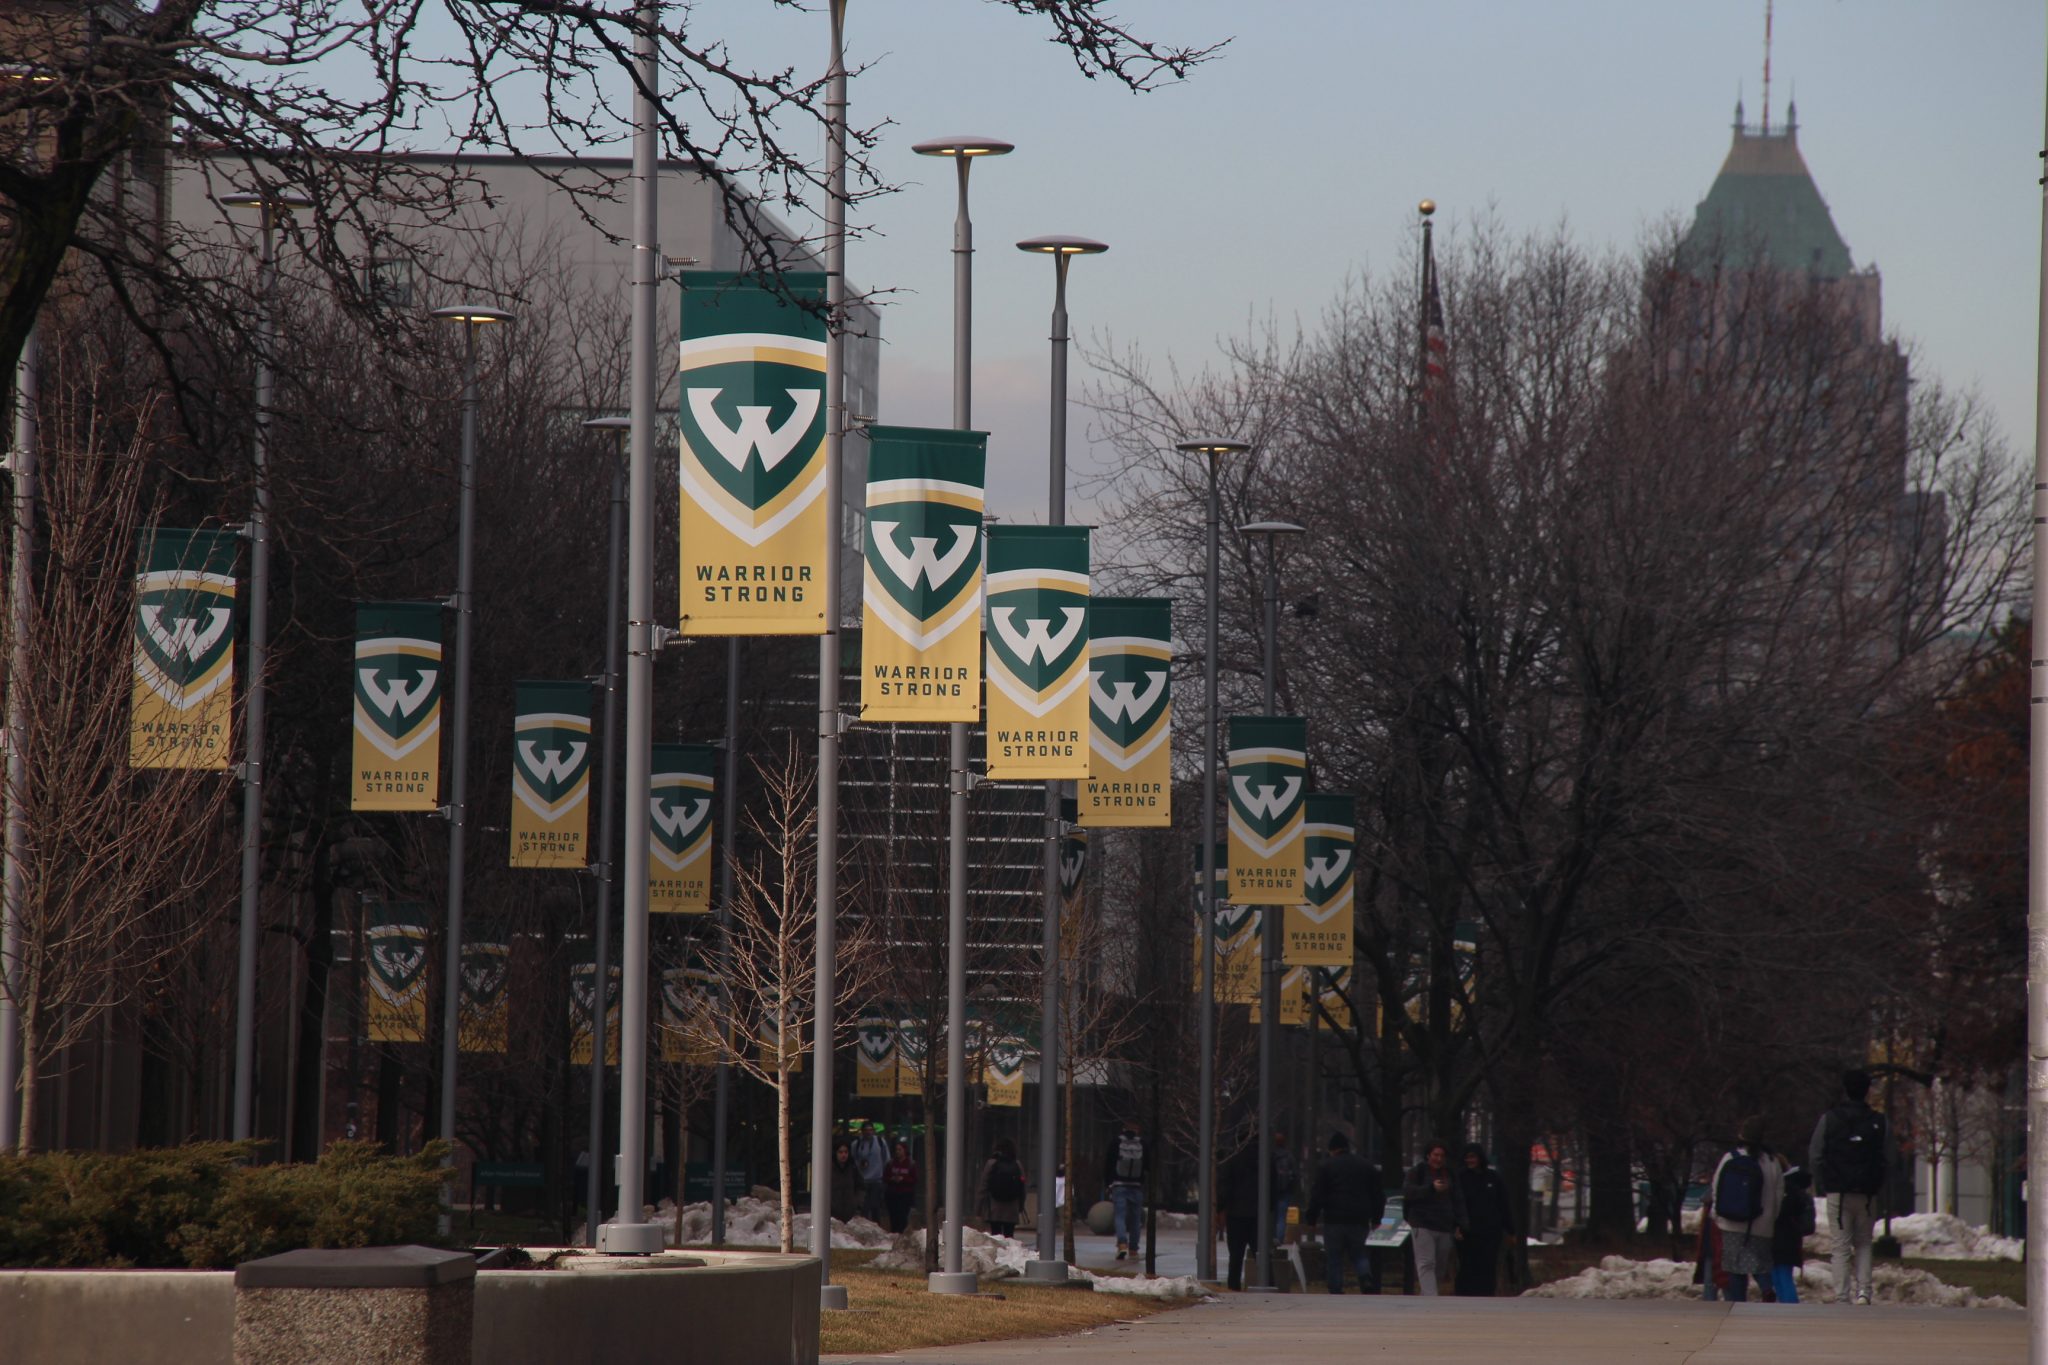 green and gold banners on light posts that read "warrior strong" with the Wayne State "w"